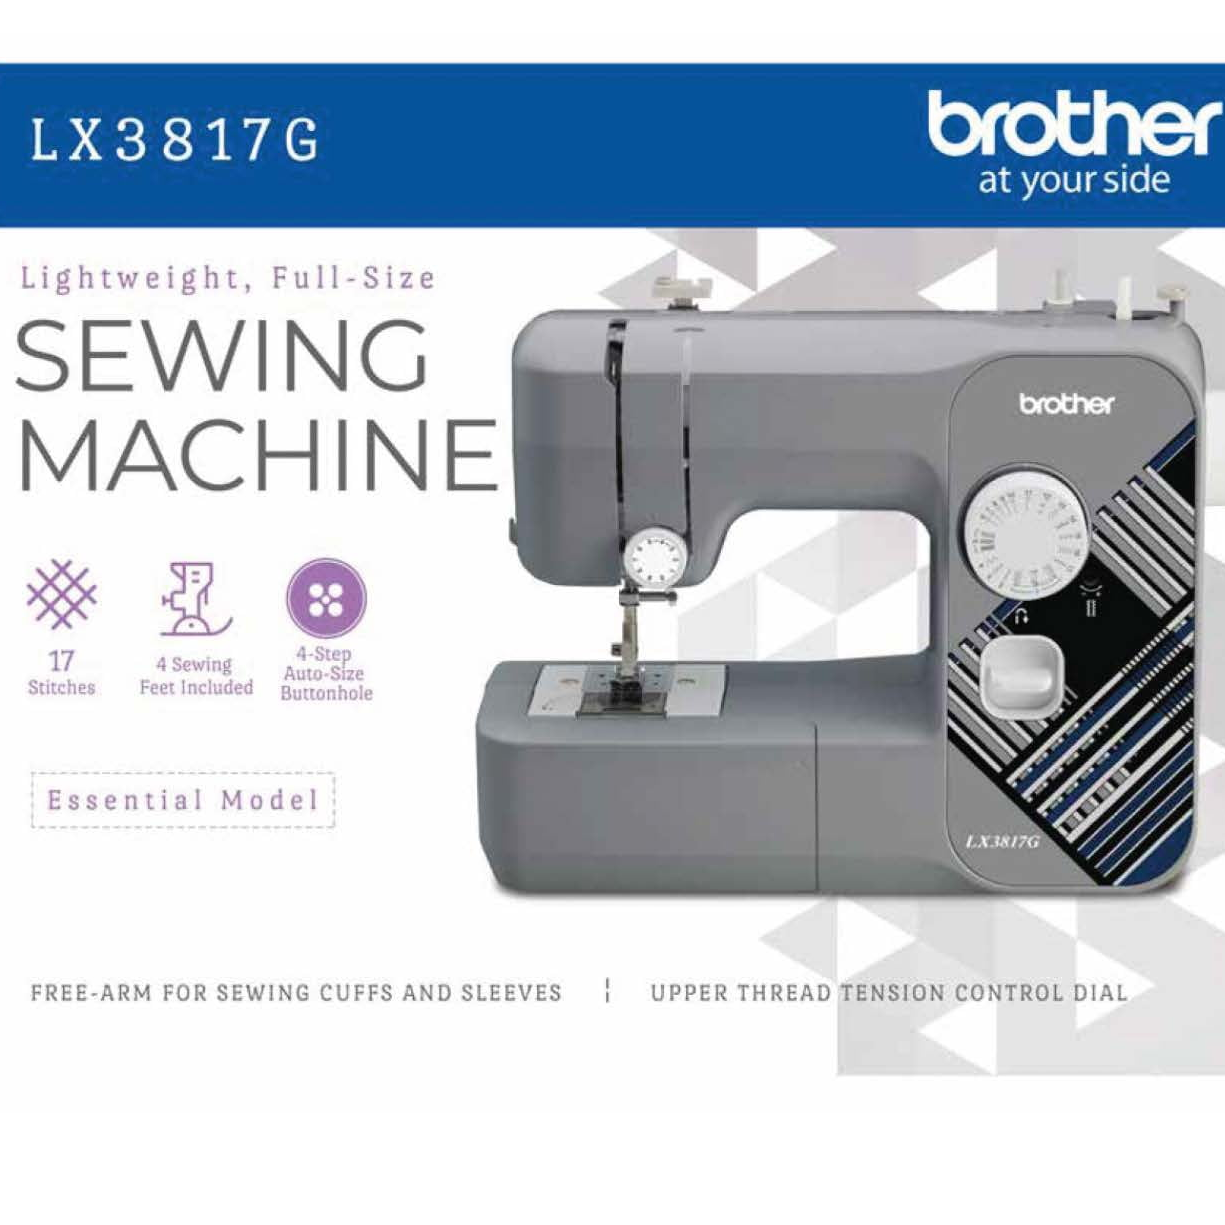 Brother LX3817G 17-Stitch Portable Full-Size Sewing Machine, Grey - image 3 of 12